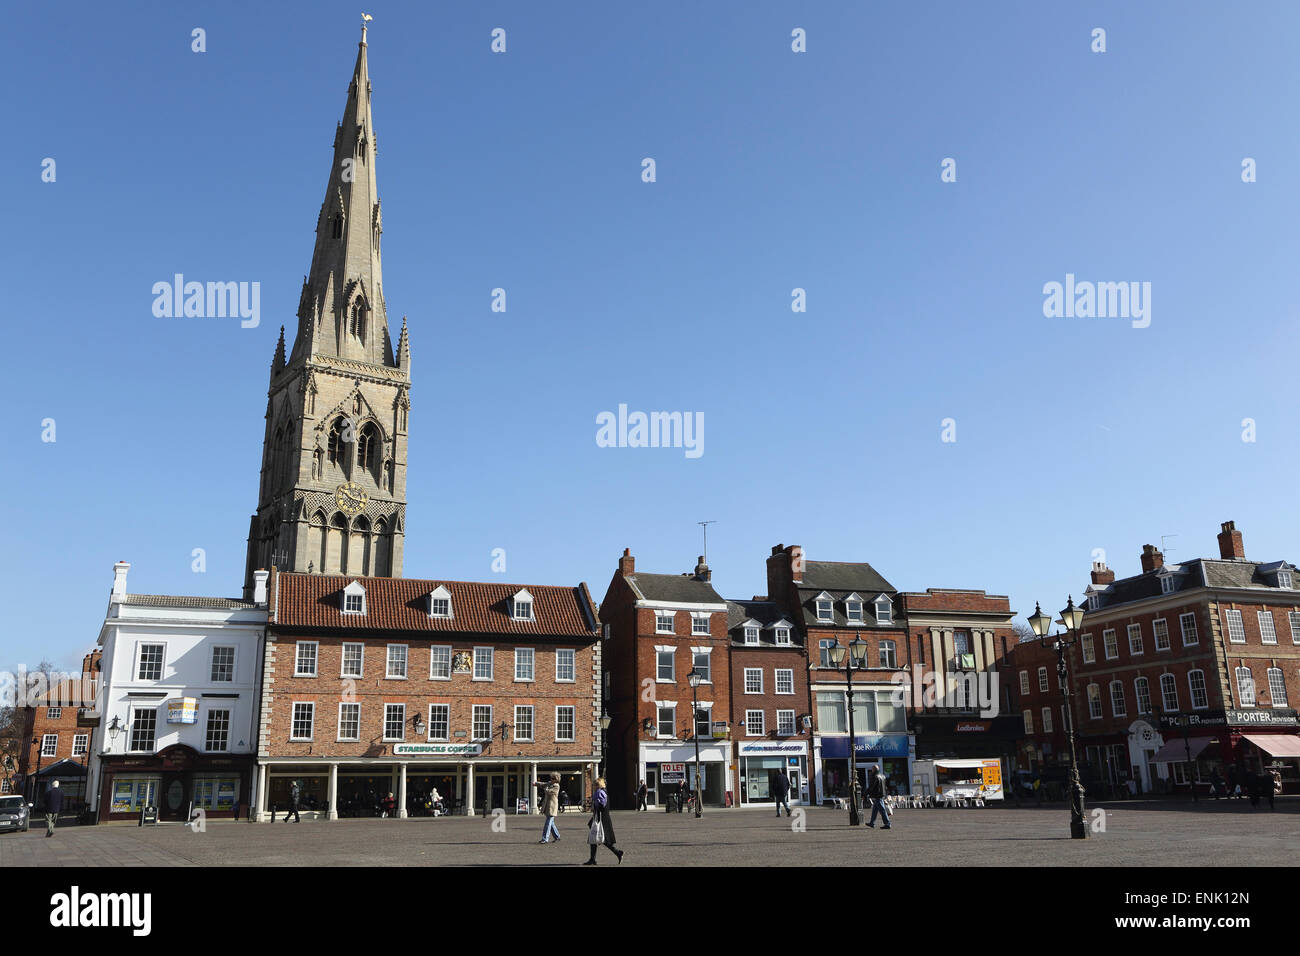 The spire of St. Mary Magdalene church rises over building on the Market Square in Newark-upon-Trent, Nottinghamshire, England Stock Photo